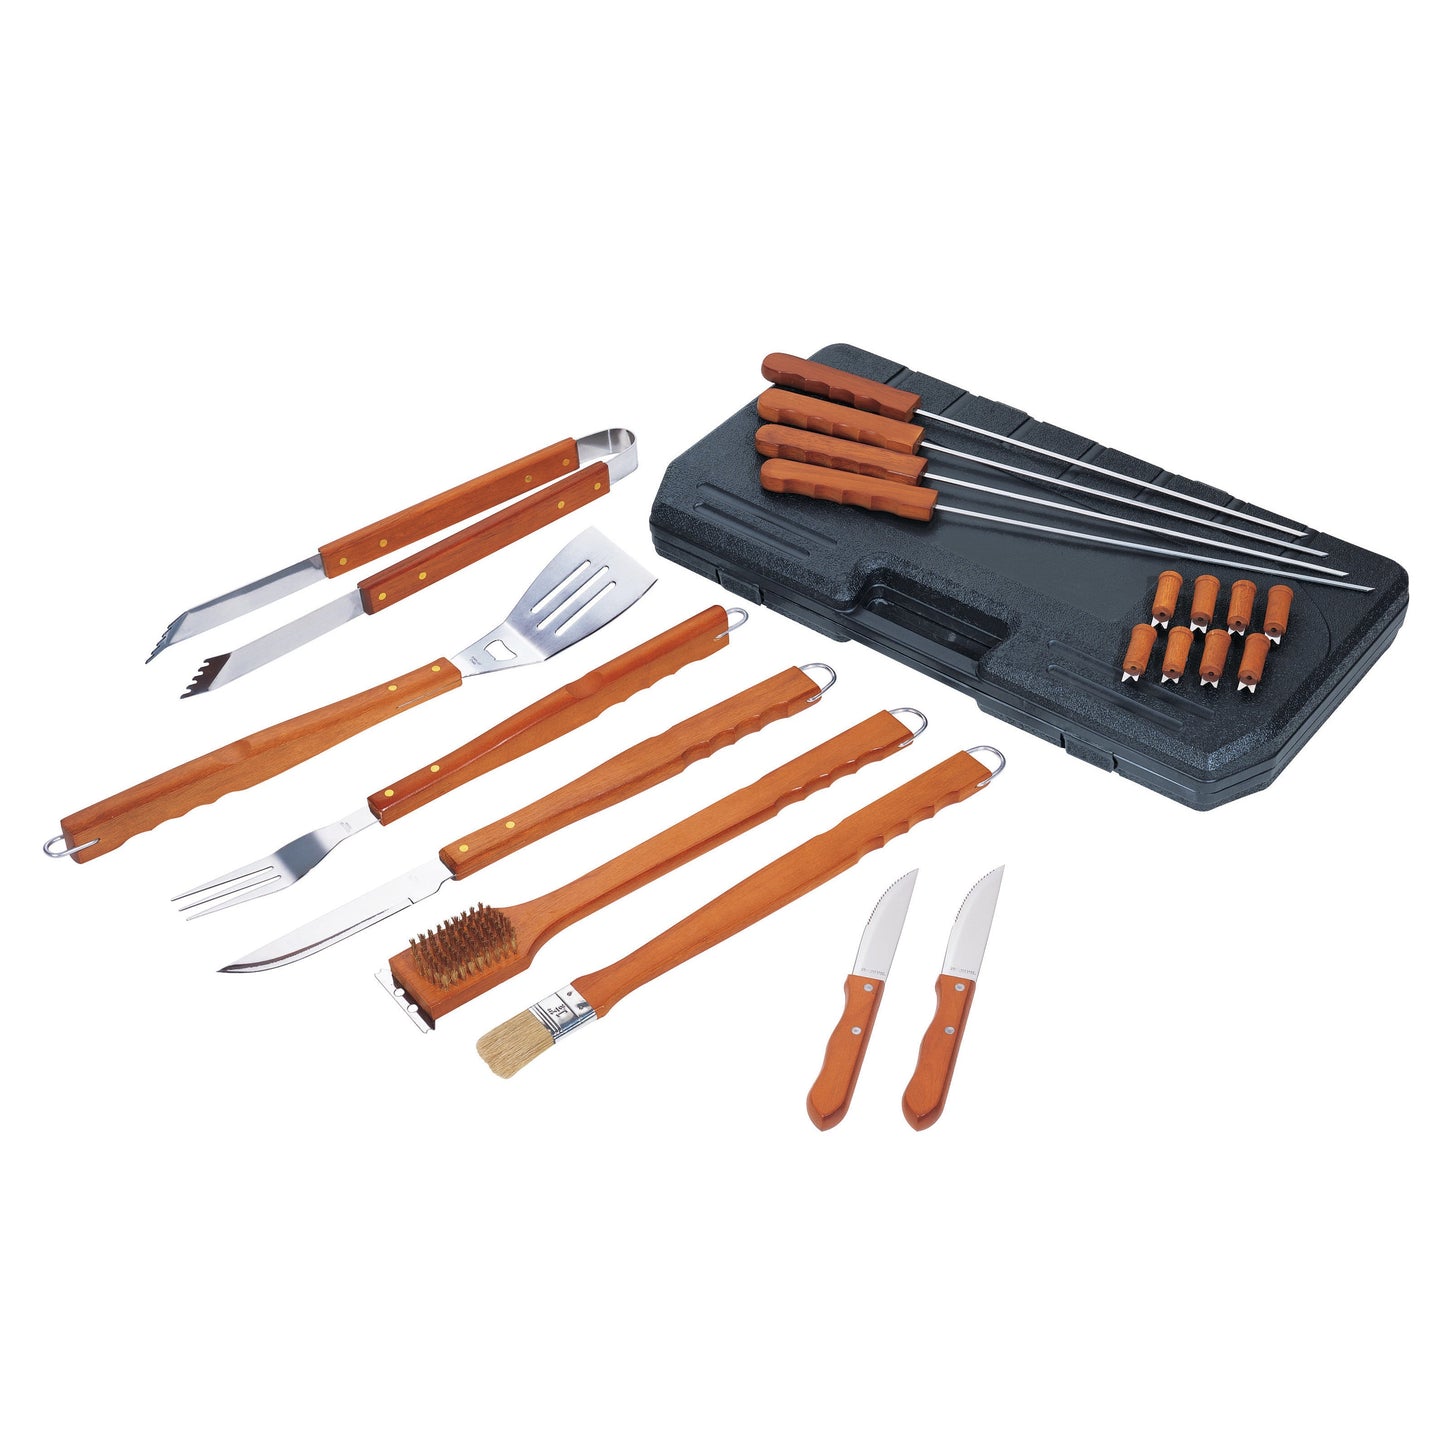 21PC DELUXE WOOD-HANDLED BBQ / BRAAI TOOL SET IN CARRY CASE